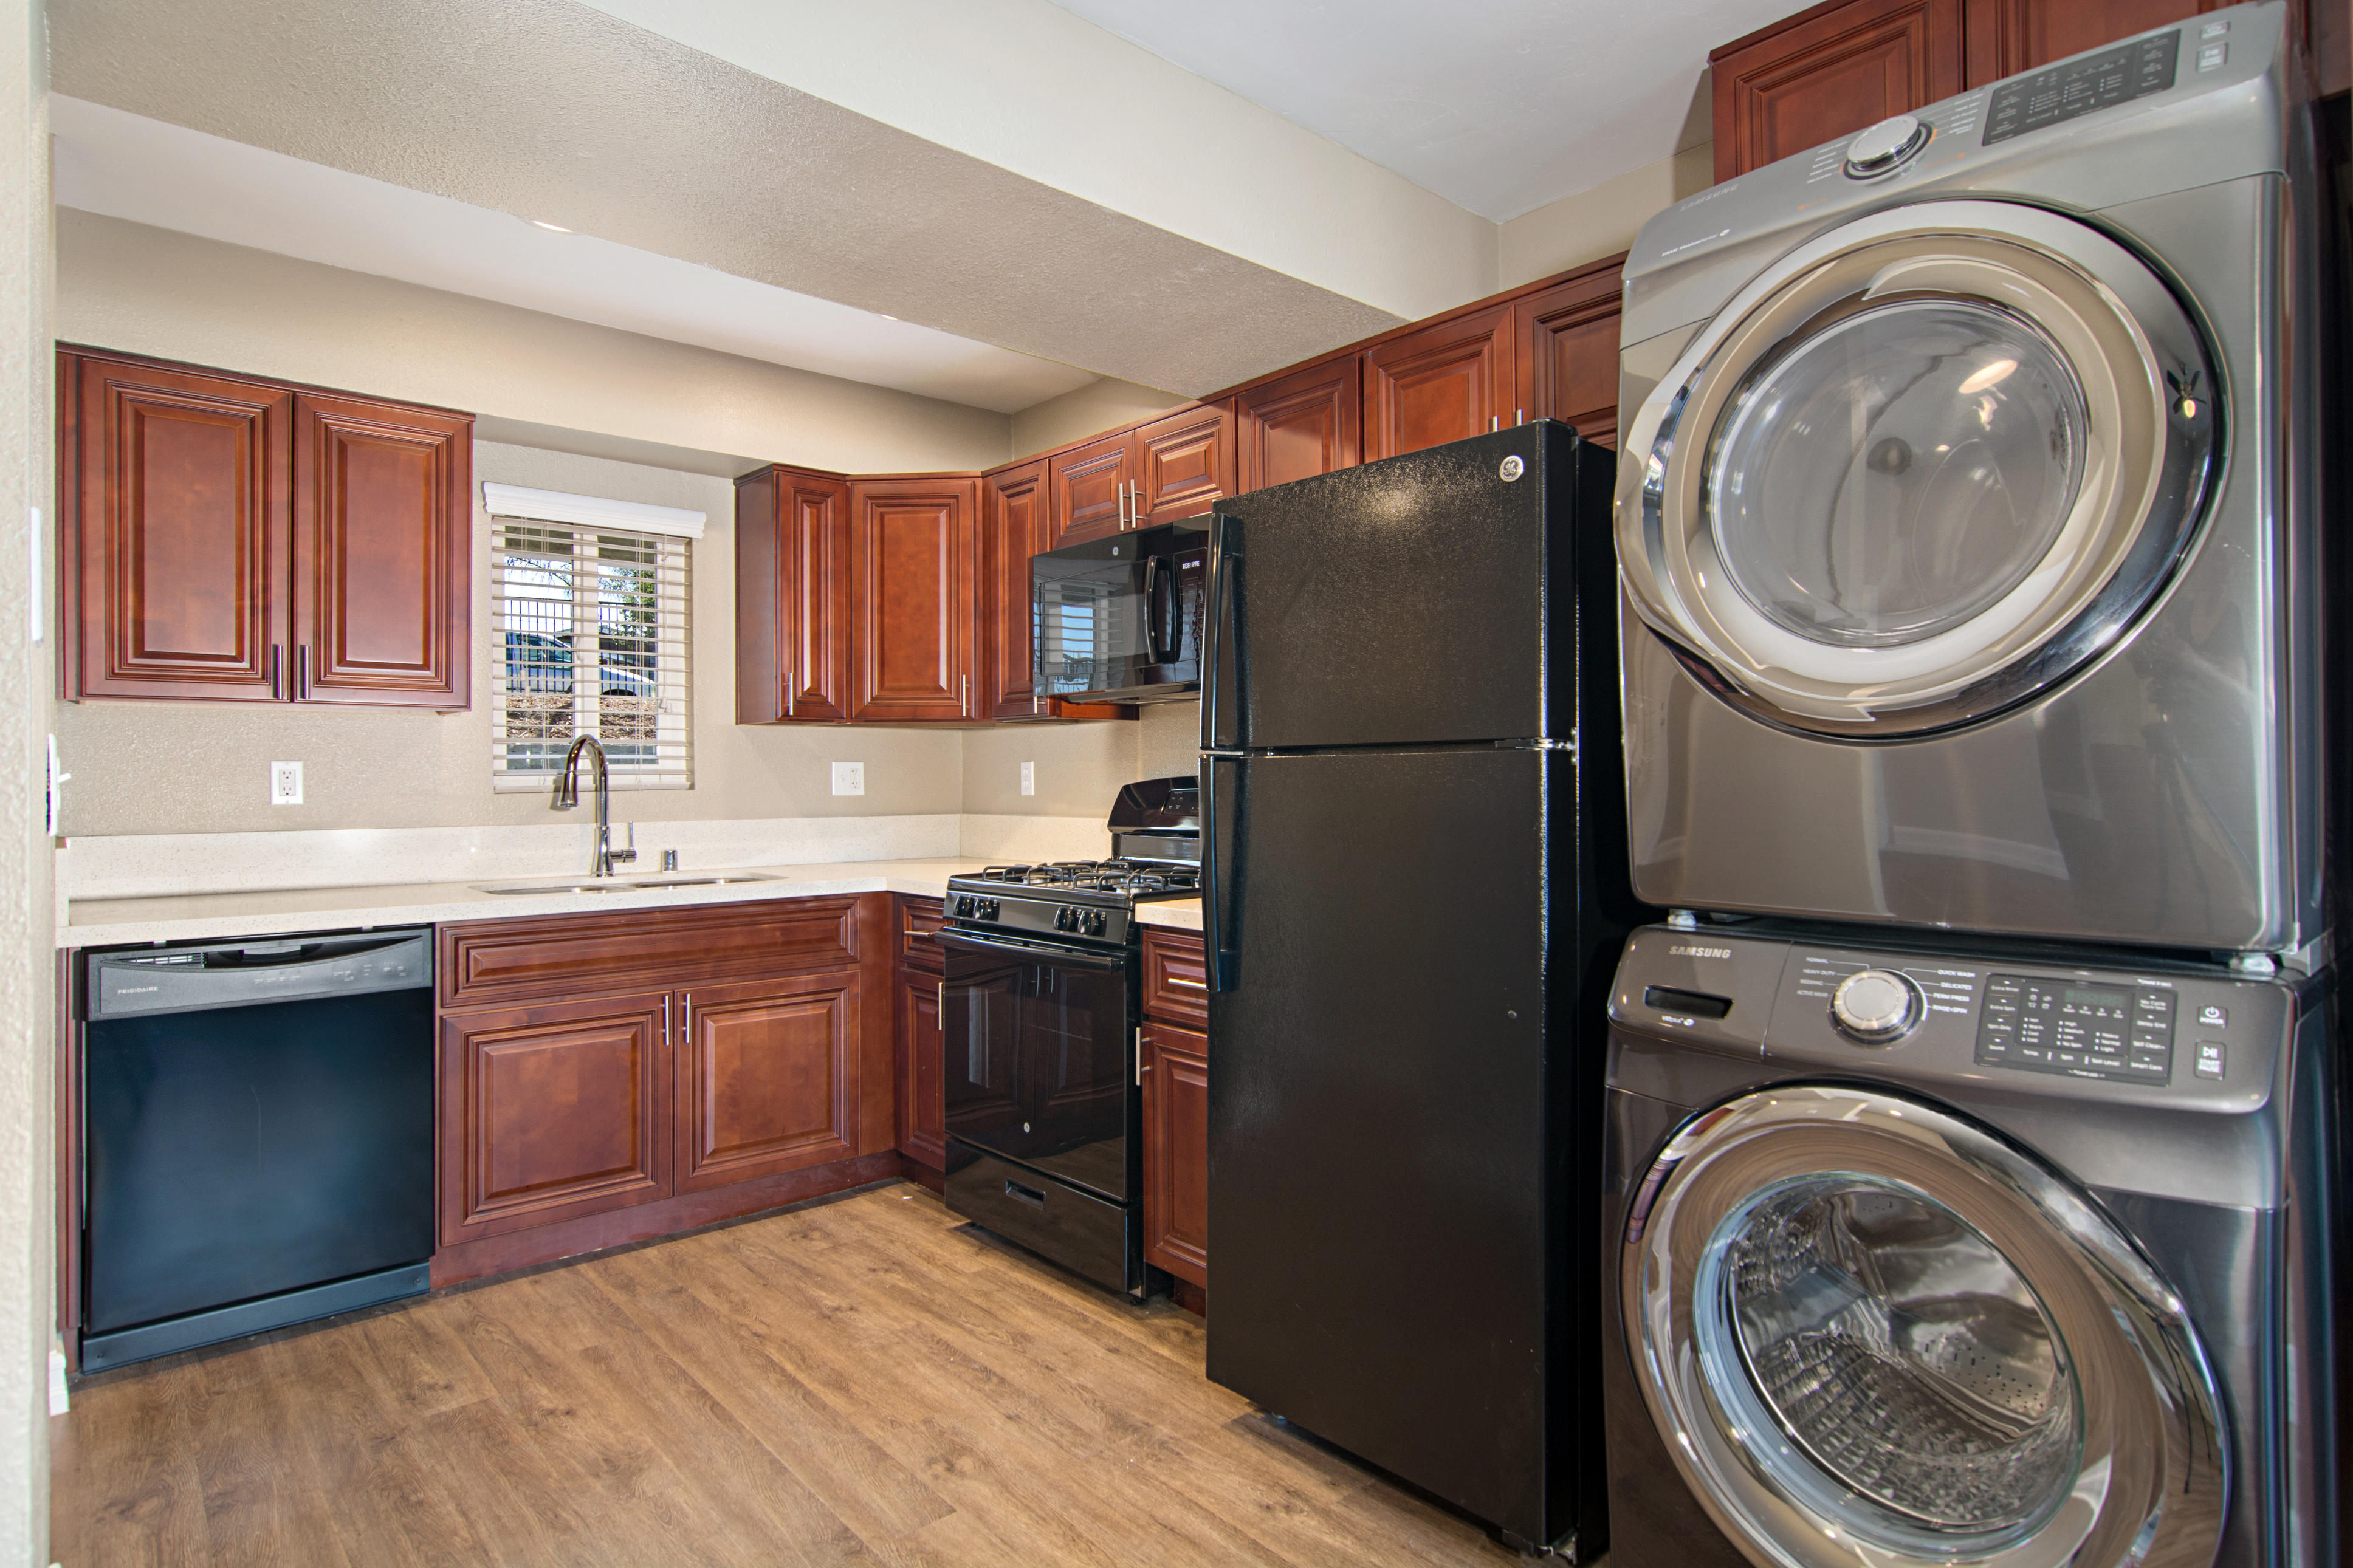 Kitchen with black appliances, maple cabinets, plank flooring, and full-size washer and dryer.